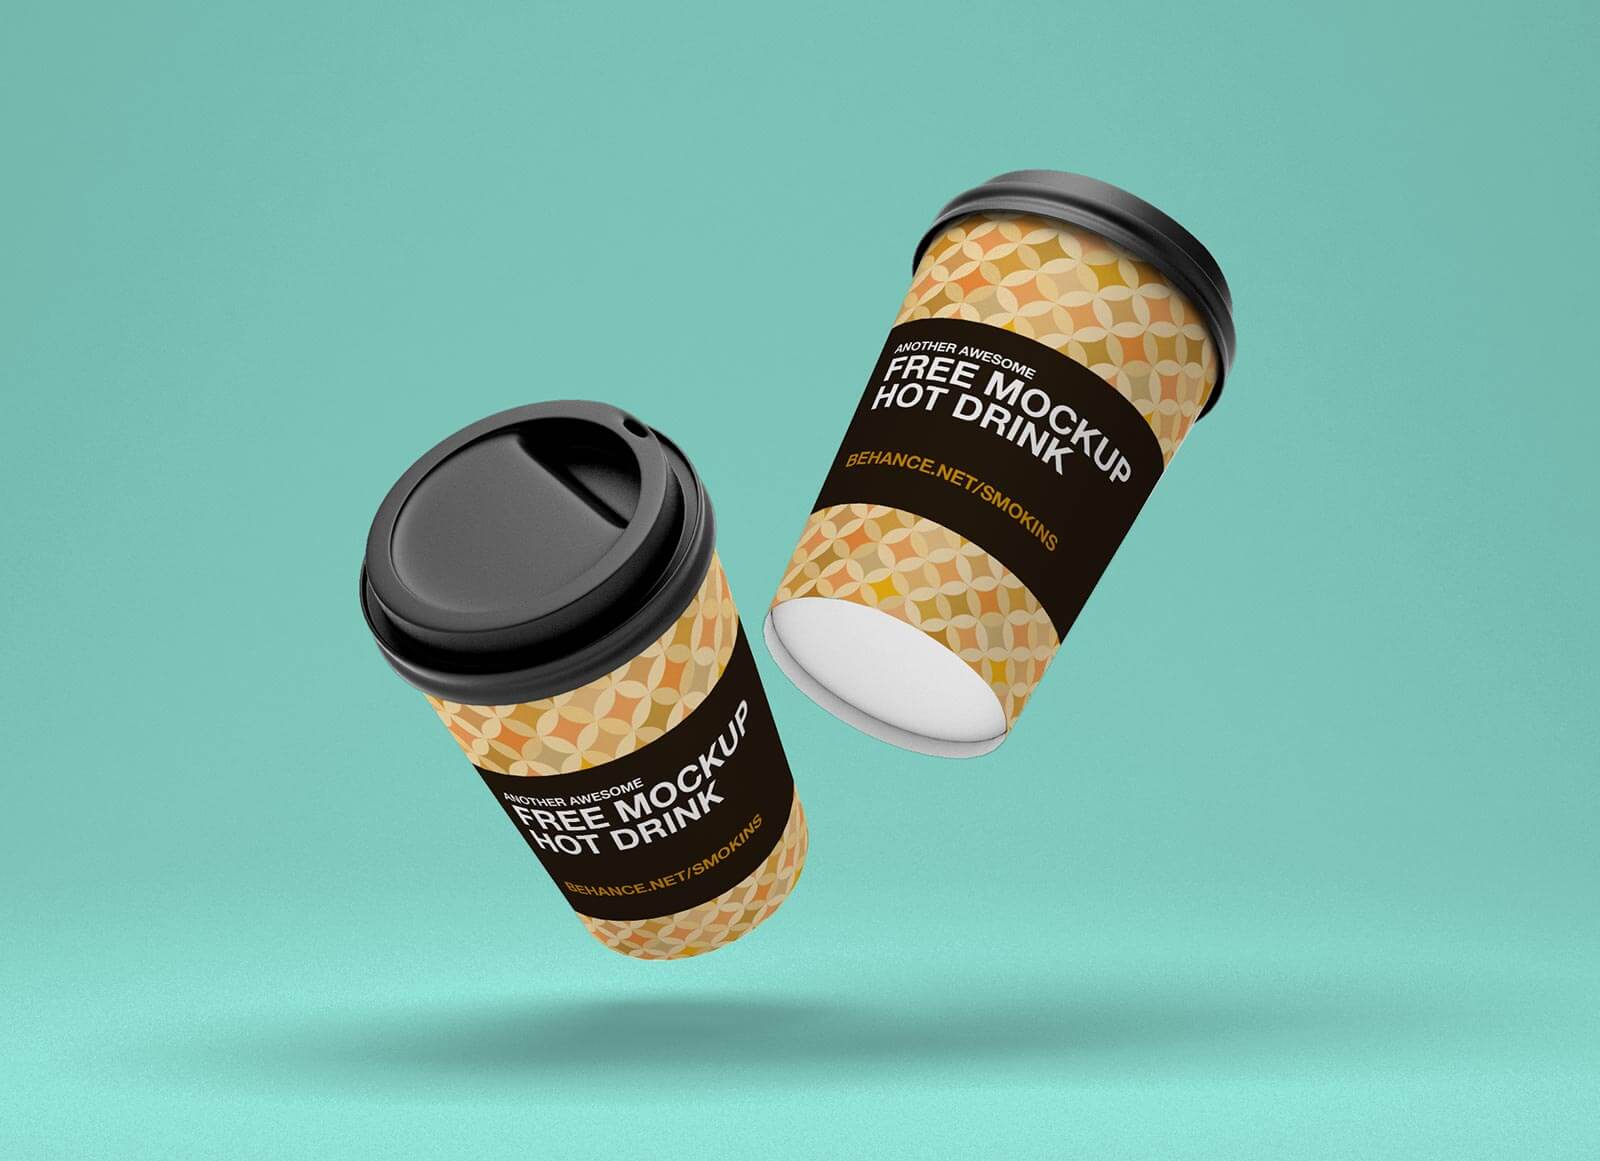 Free-Floating-Dual-Paper-Coffee-Cup-Mockup-PSD